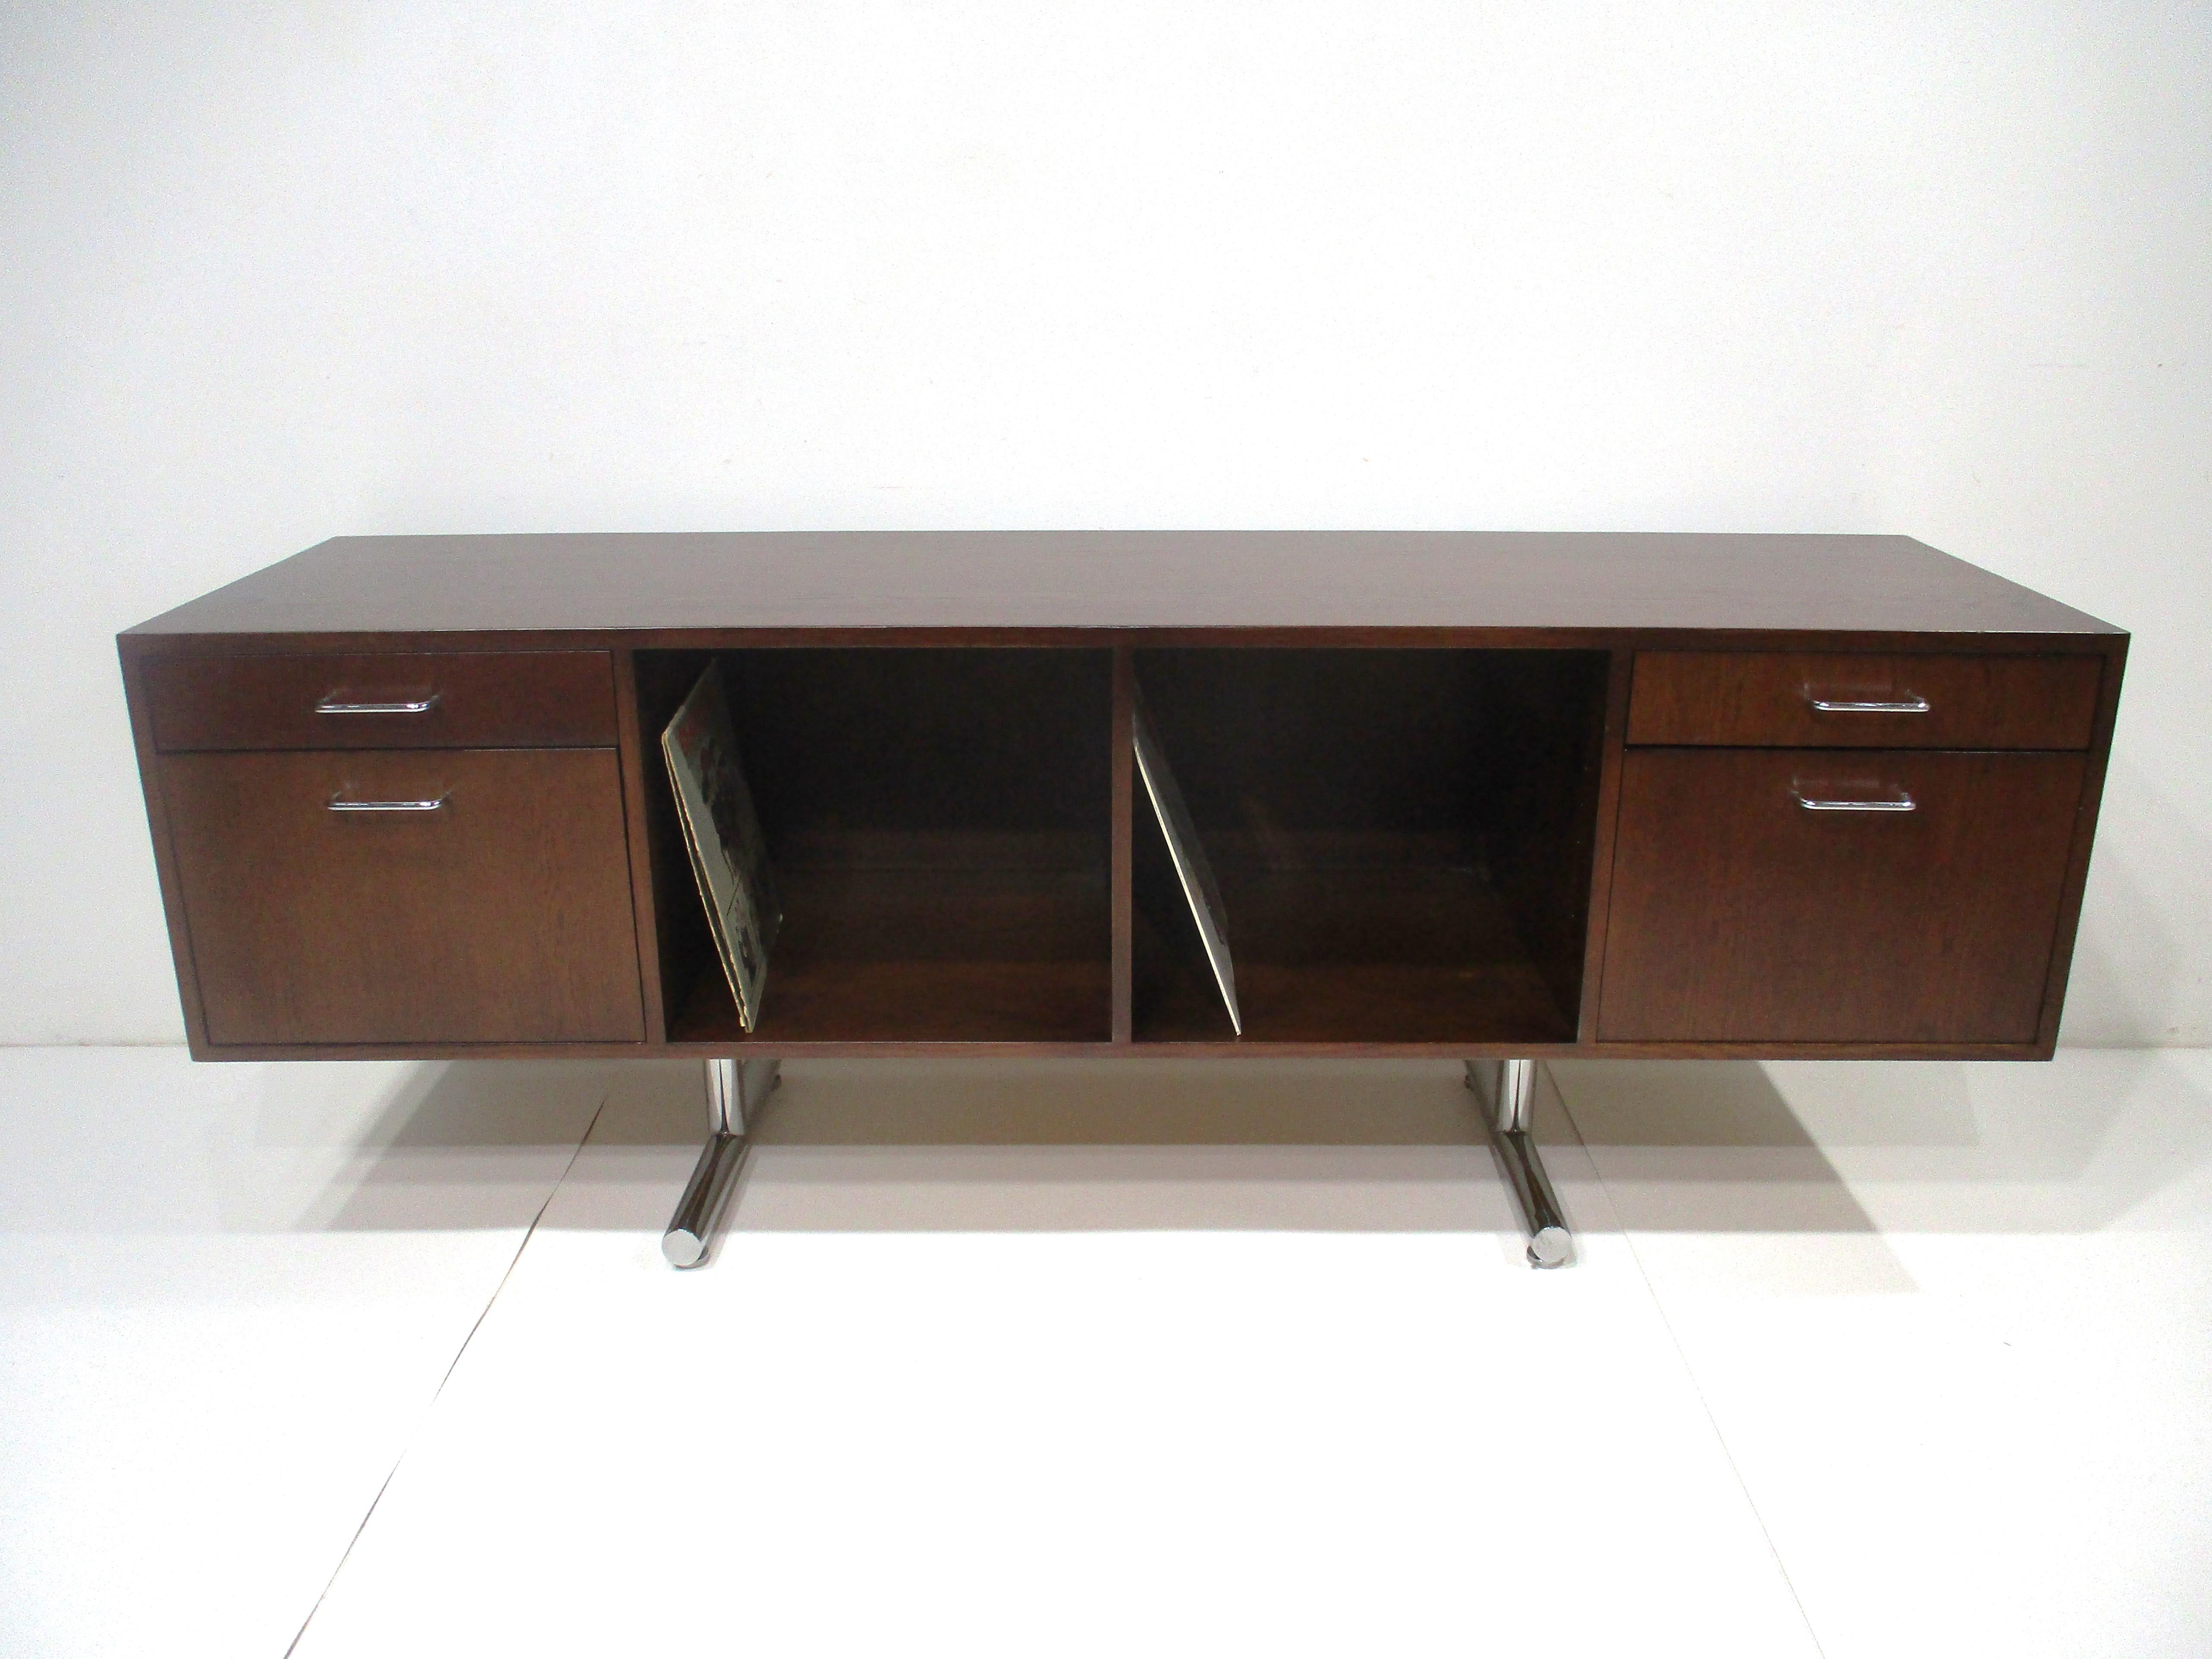 A very well crafted credenza or stereo entertainment cabinet in a dark walnut toned finish . Having two adjustable and removable shelves for records or your systems , two small drawers , two larger drawers to each side and chrome handles to the